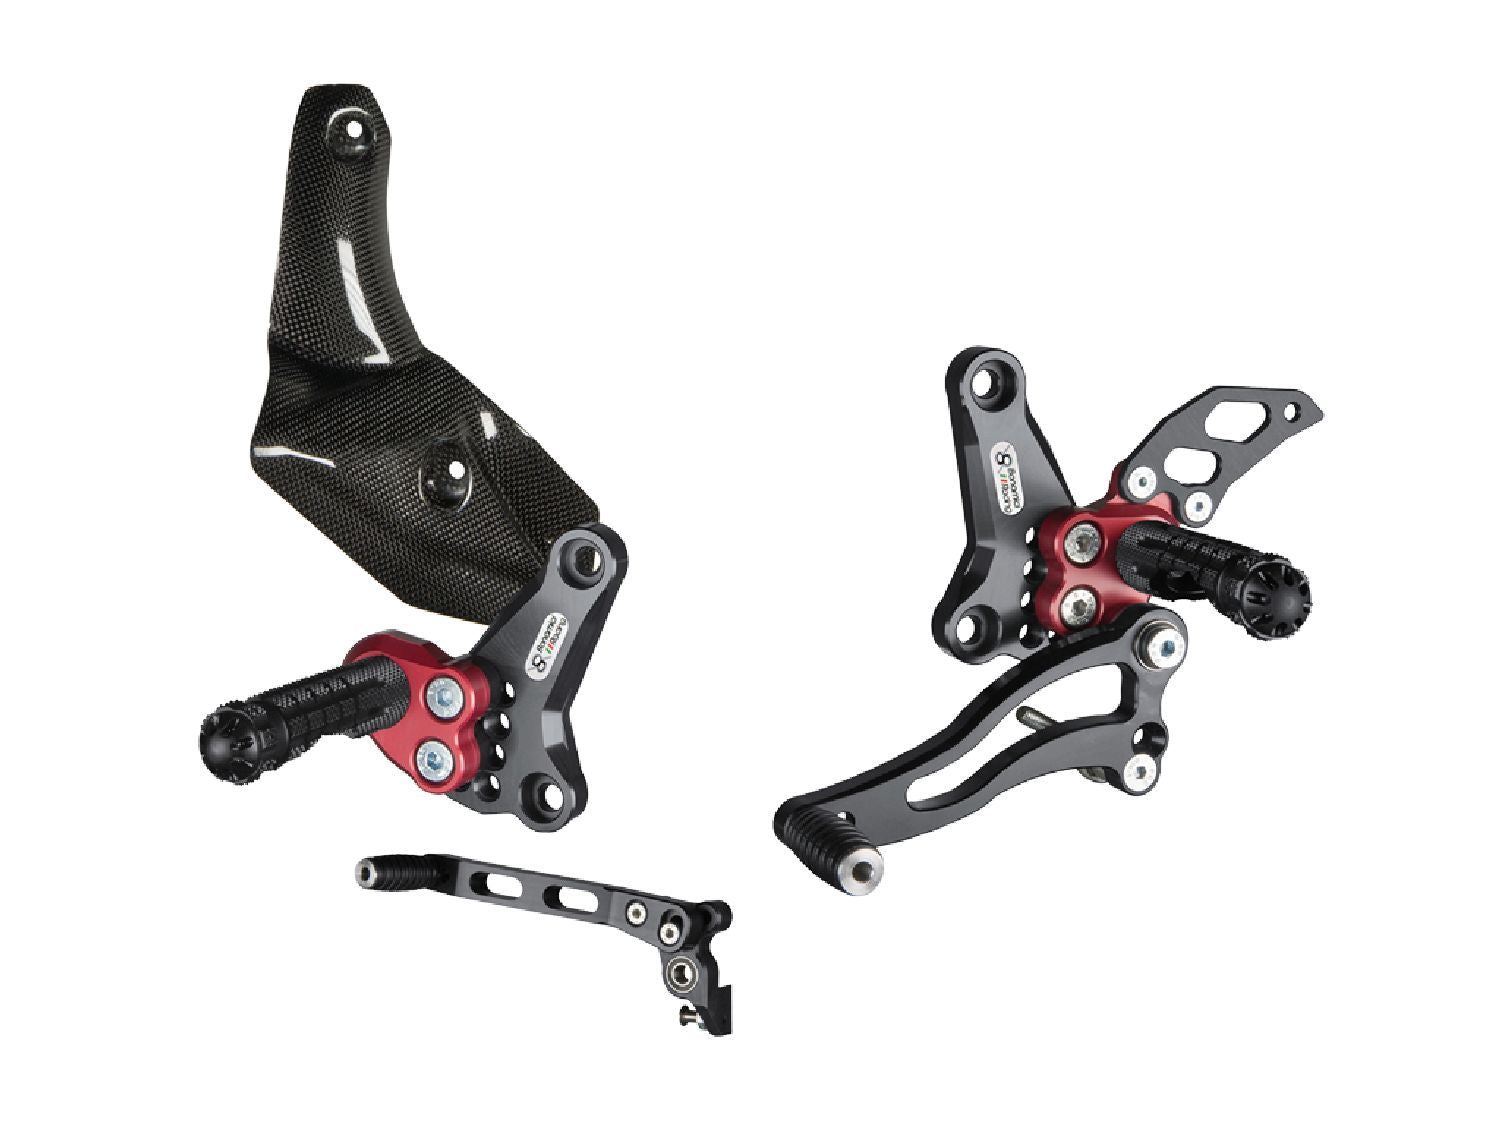 Bonamici 2009 - 2016 Ducati Streetfighter 848 1098 Rearsets Foot Pegs w/ Carbon Exhaust Guard